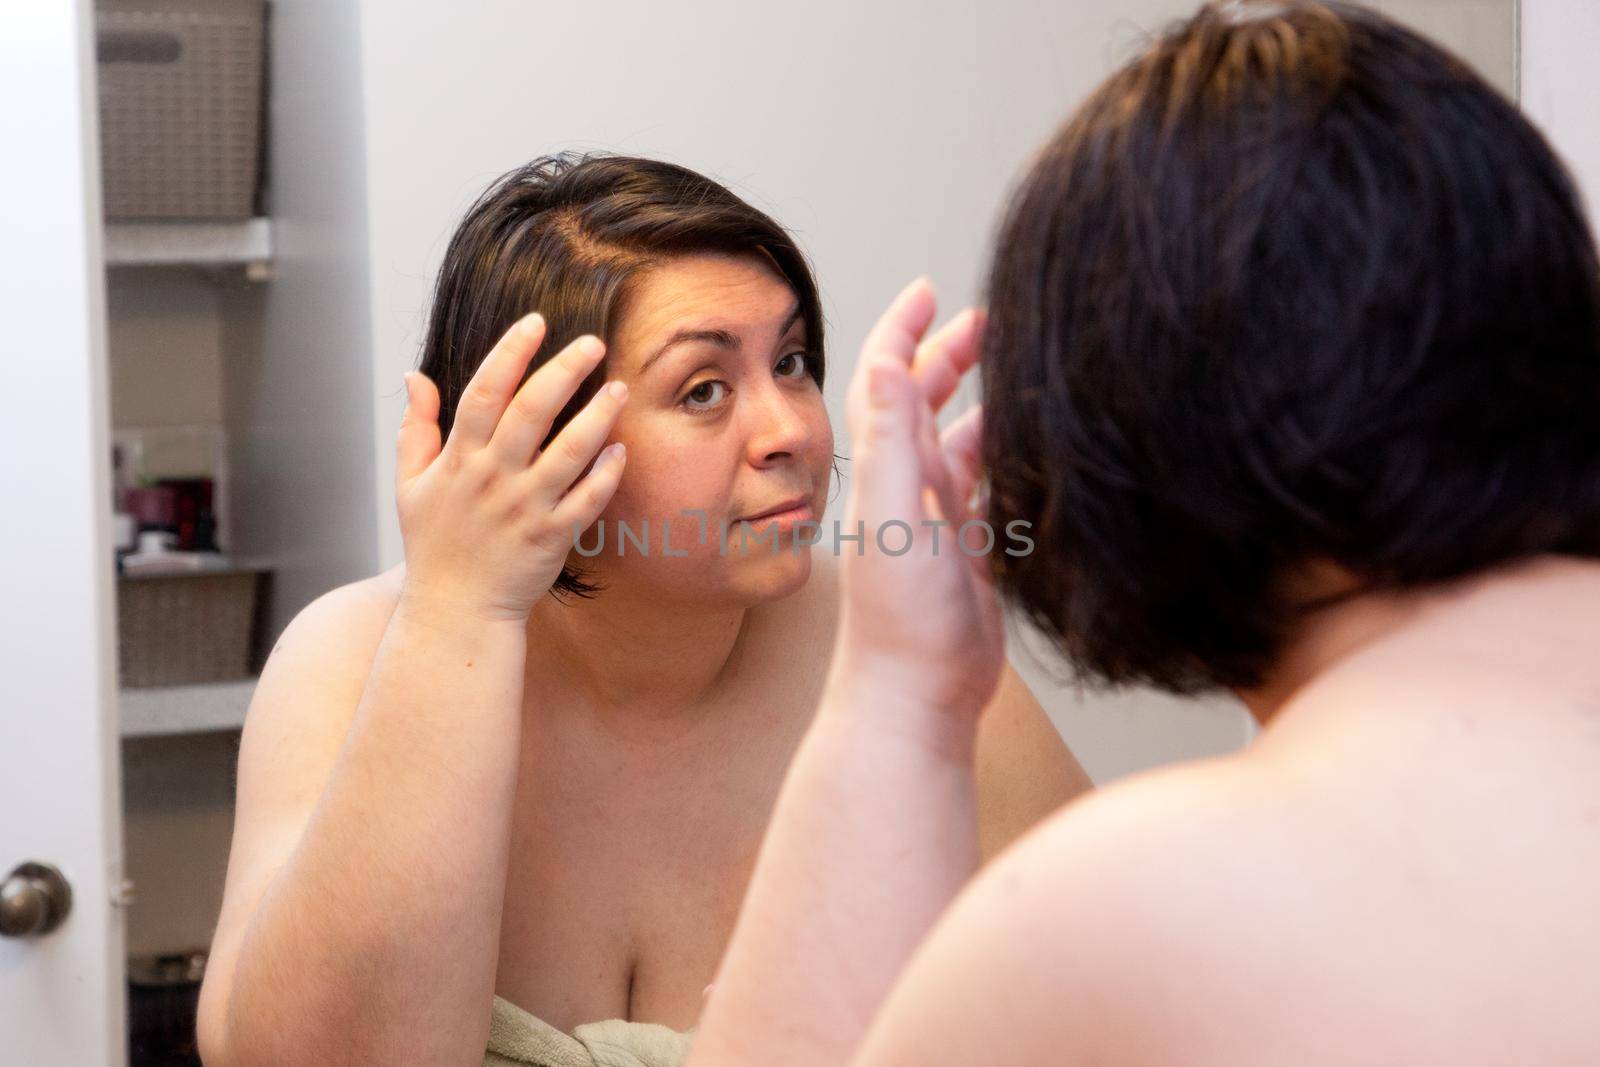 Woman looks into her mirror and touches hair 